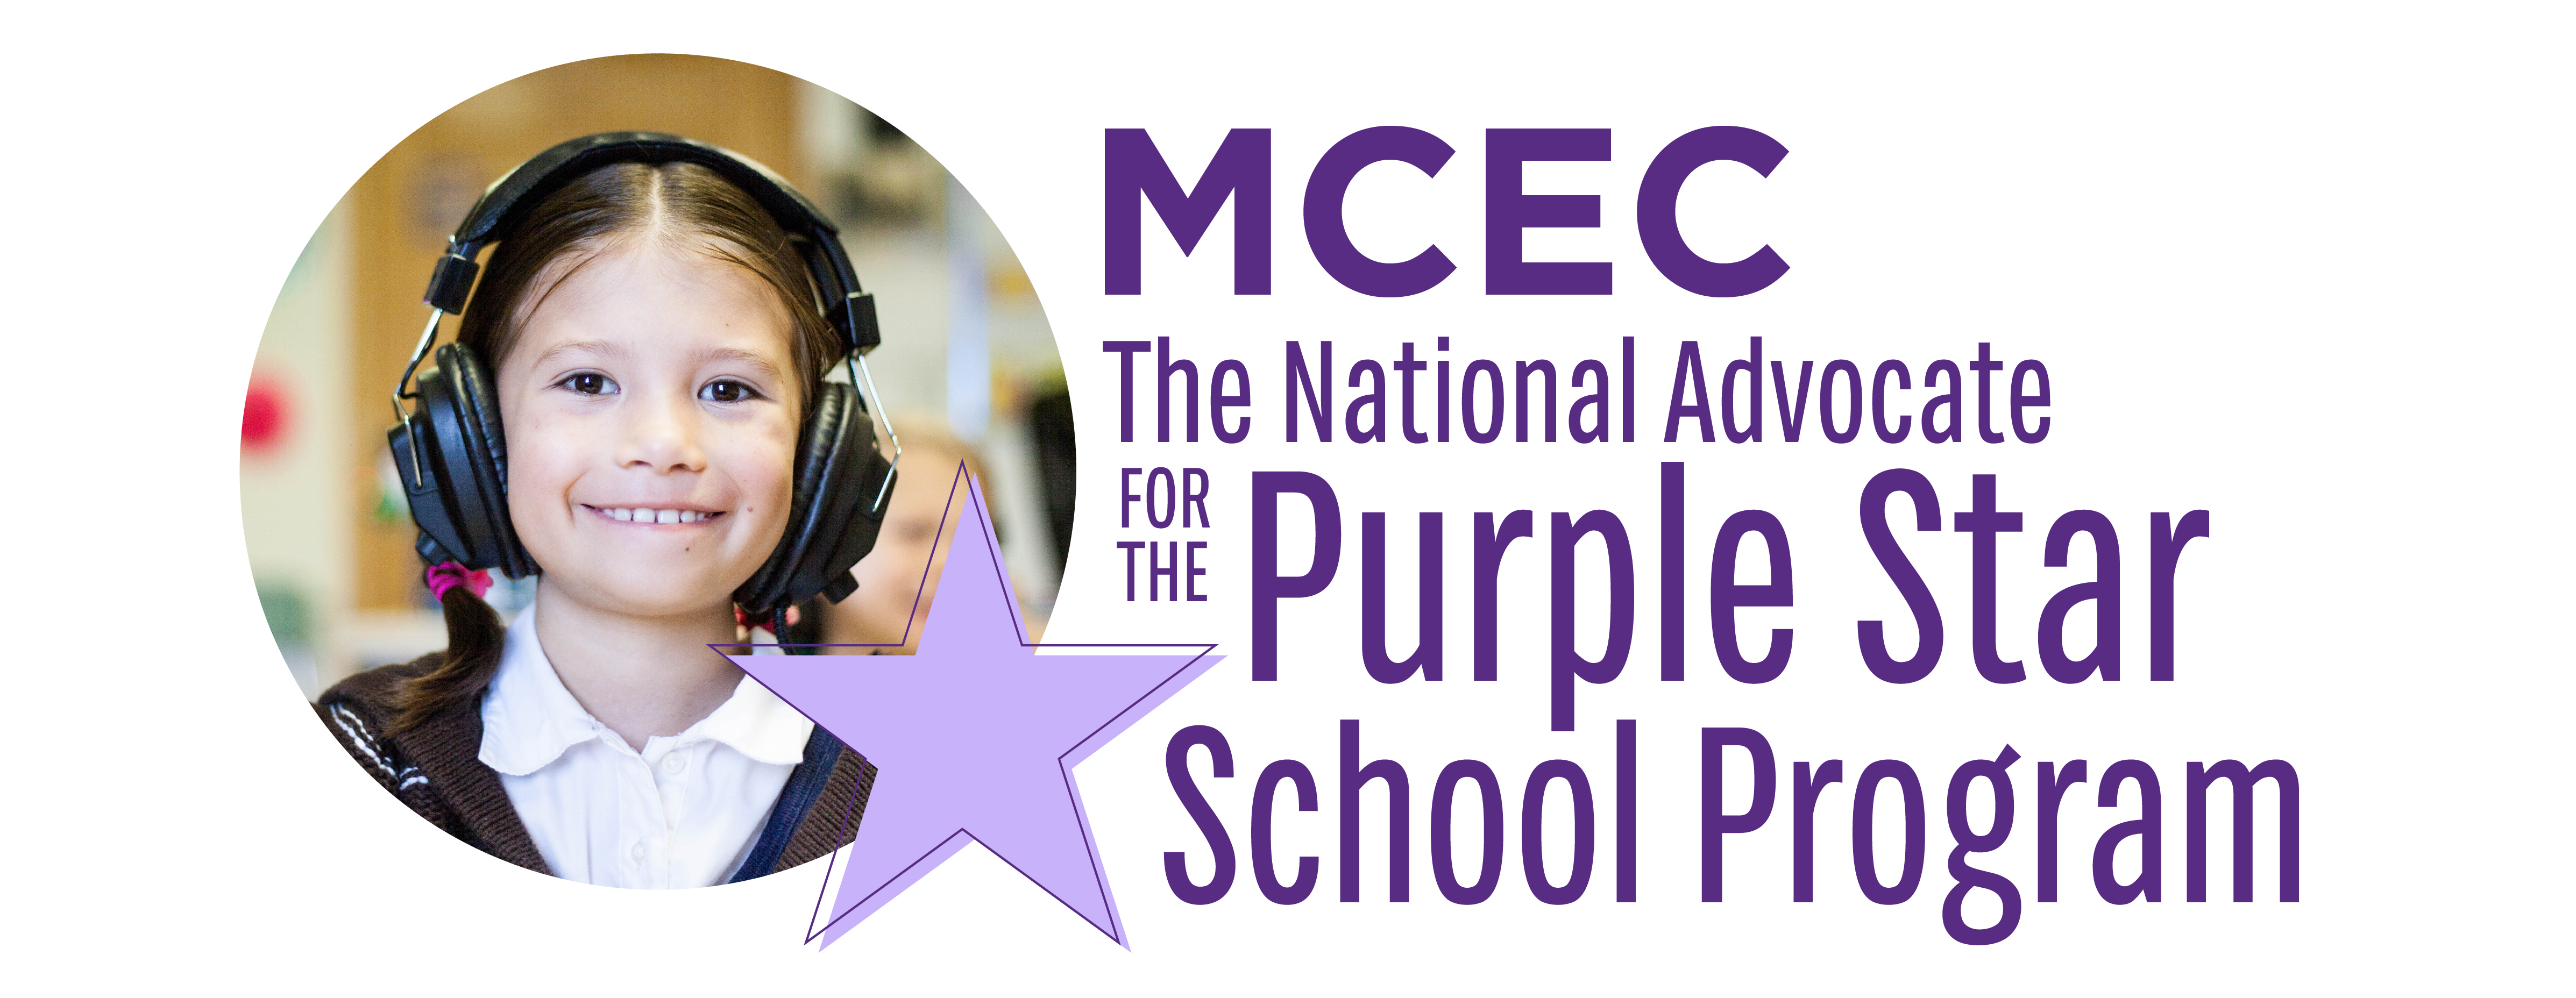 MCEC: The National Advocate for Purple Star School Program